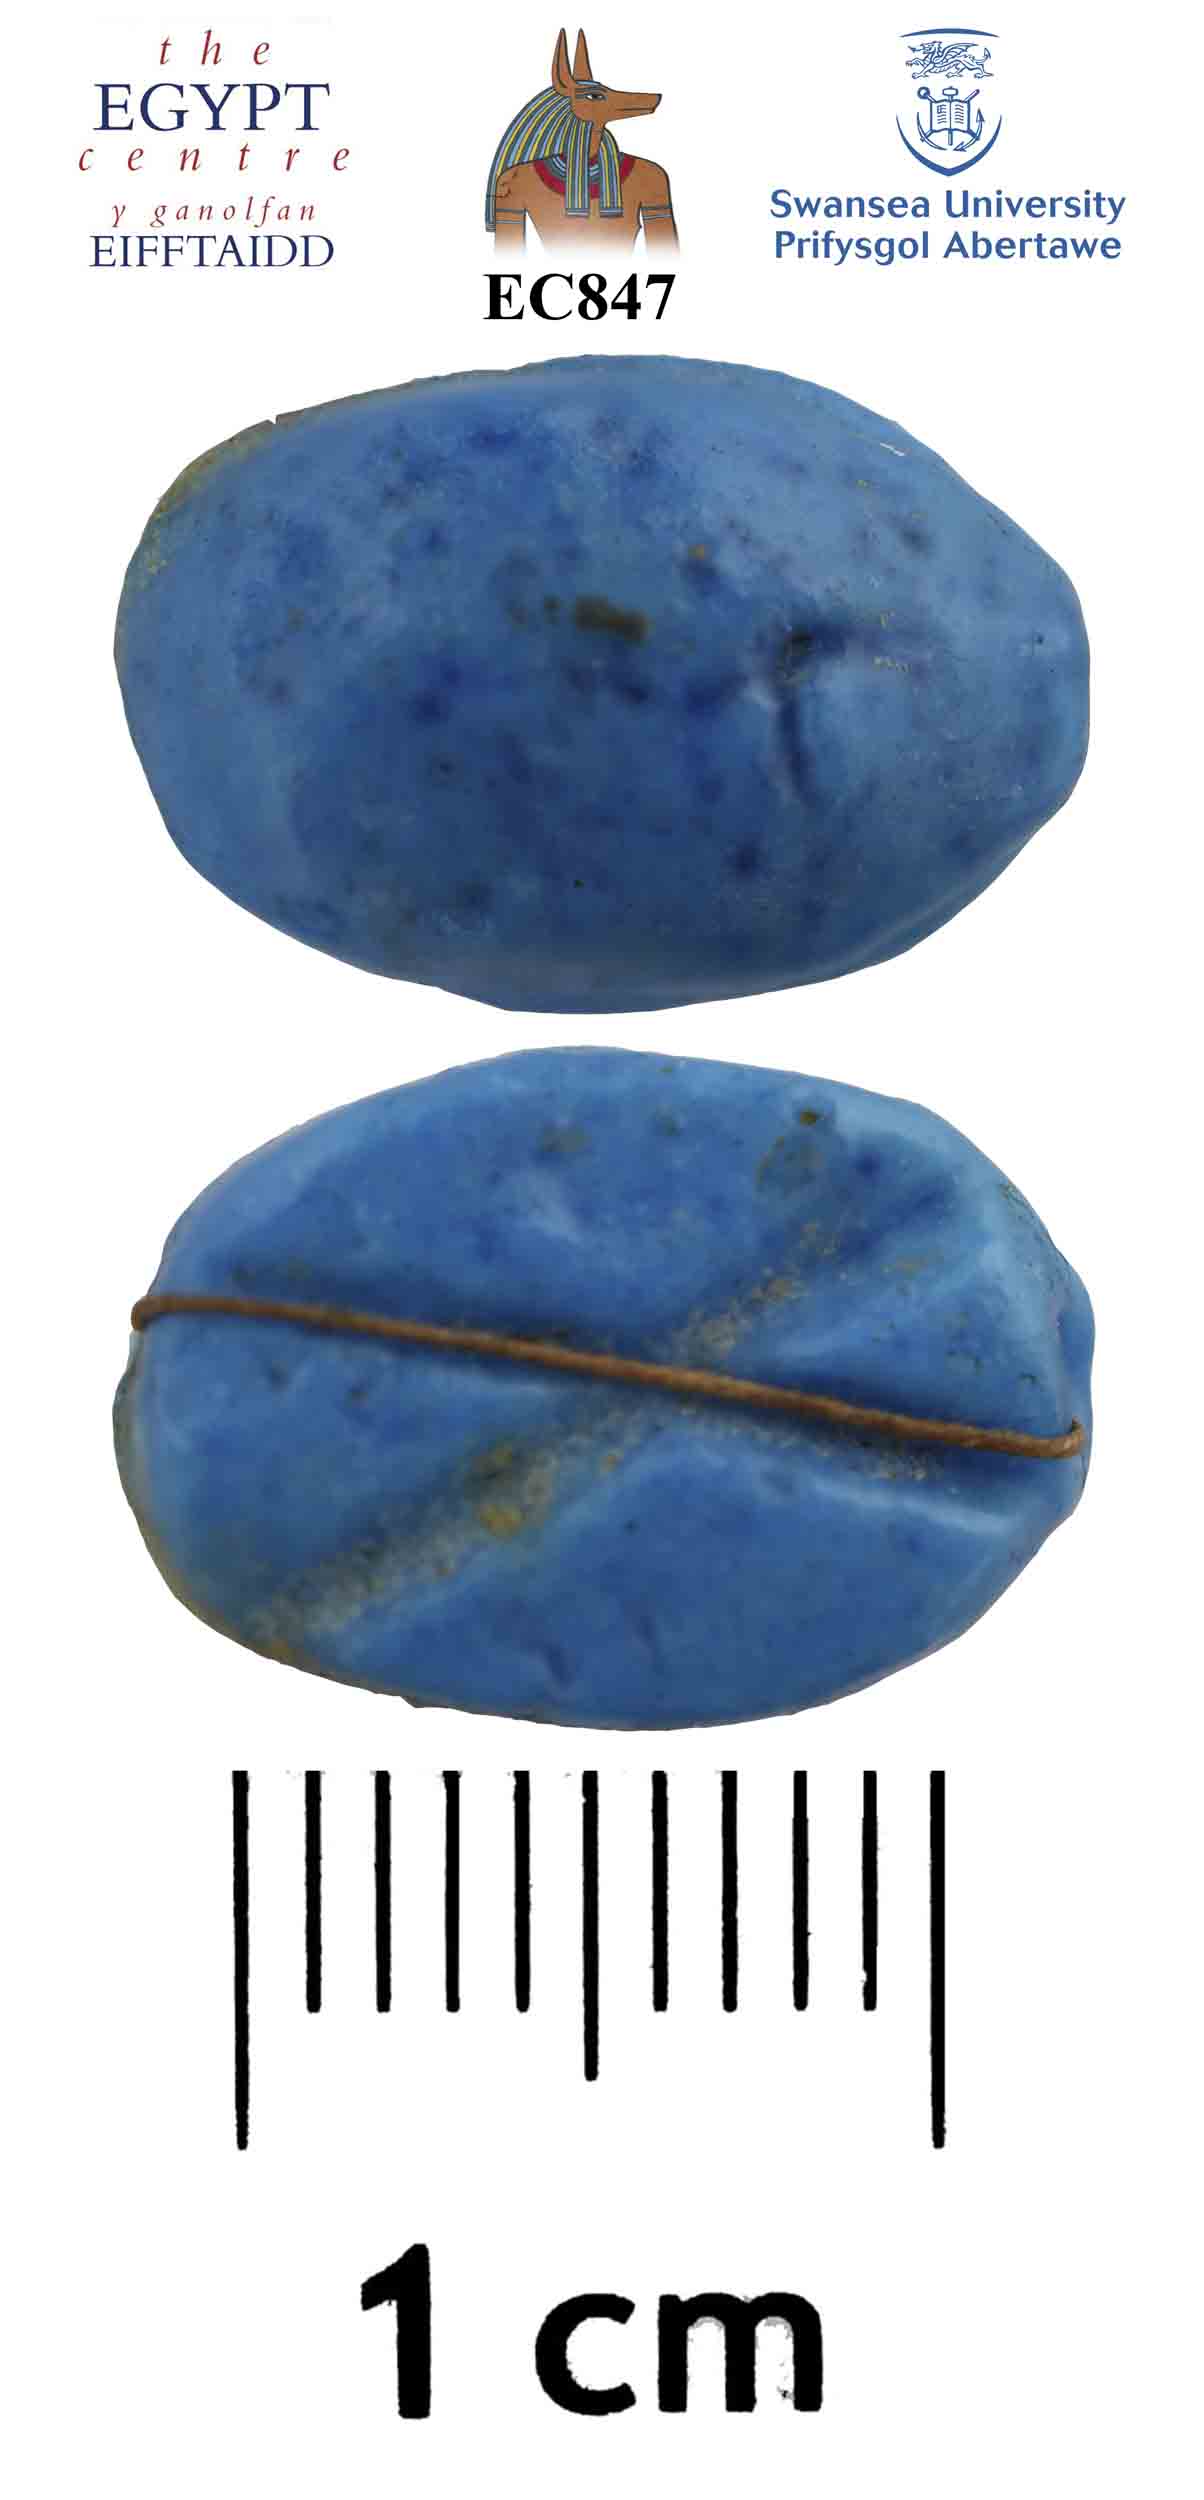 Image for: Faience scarab